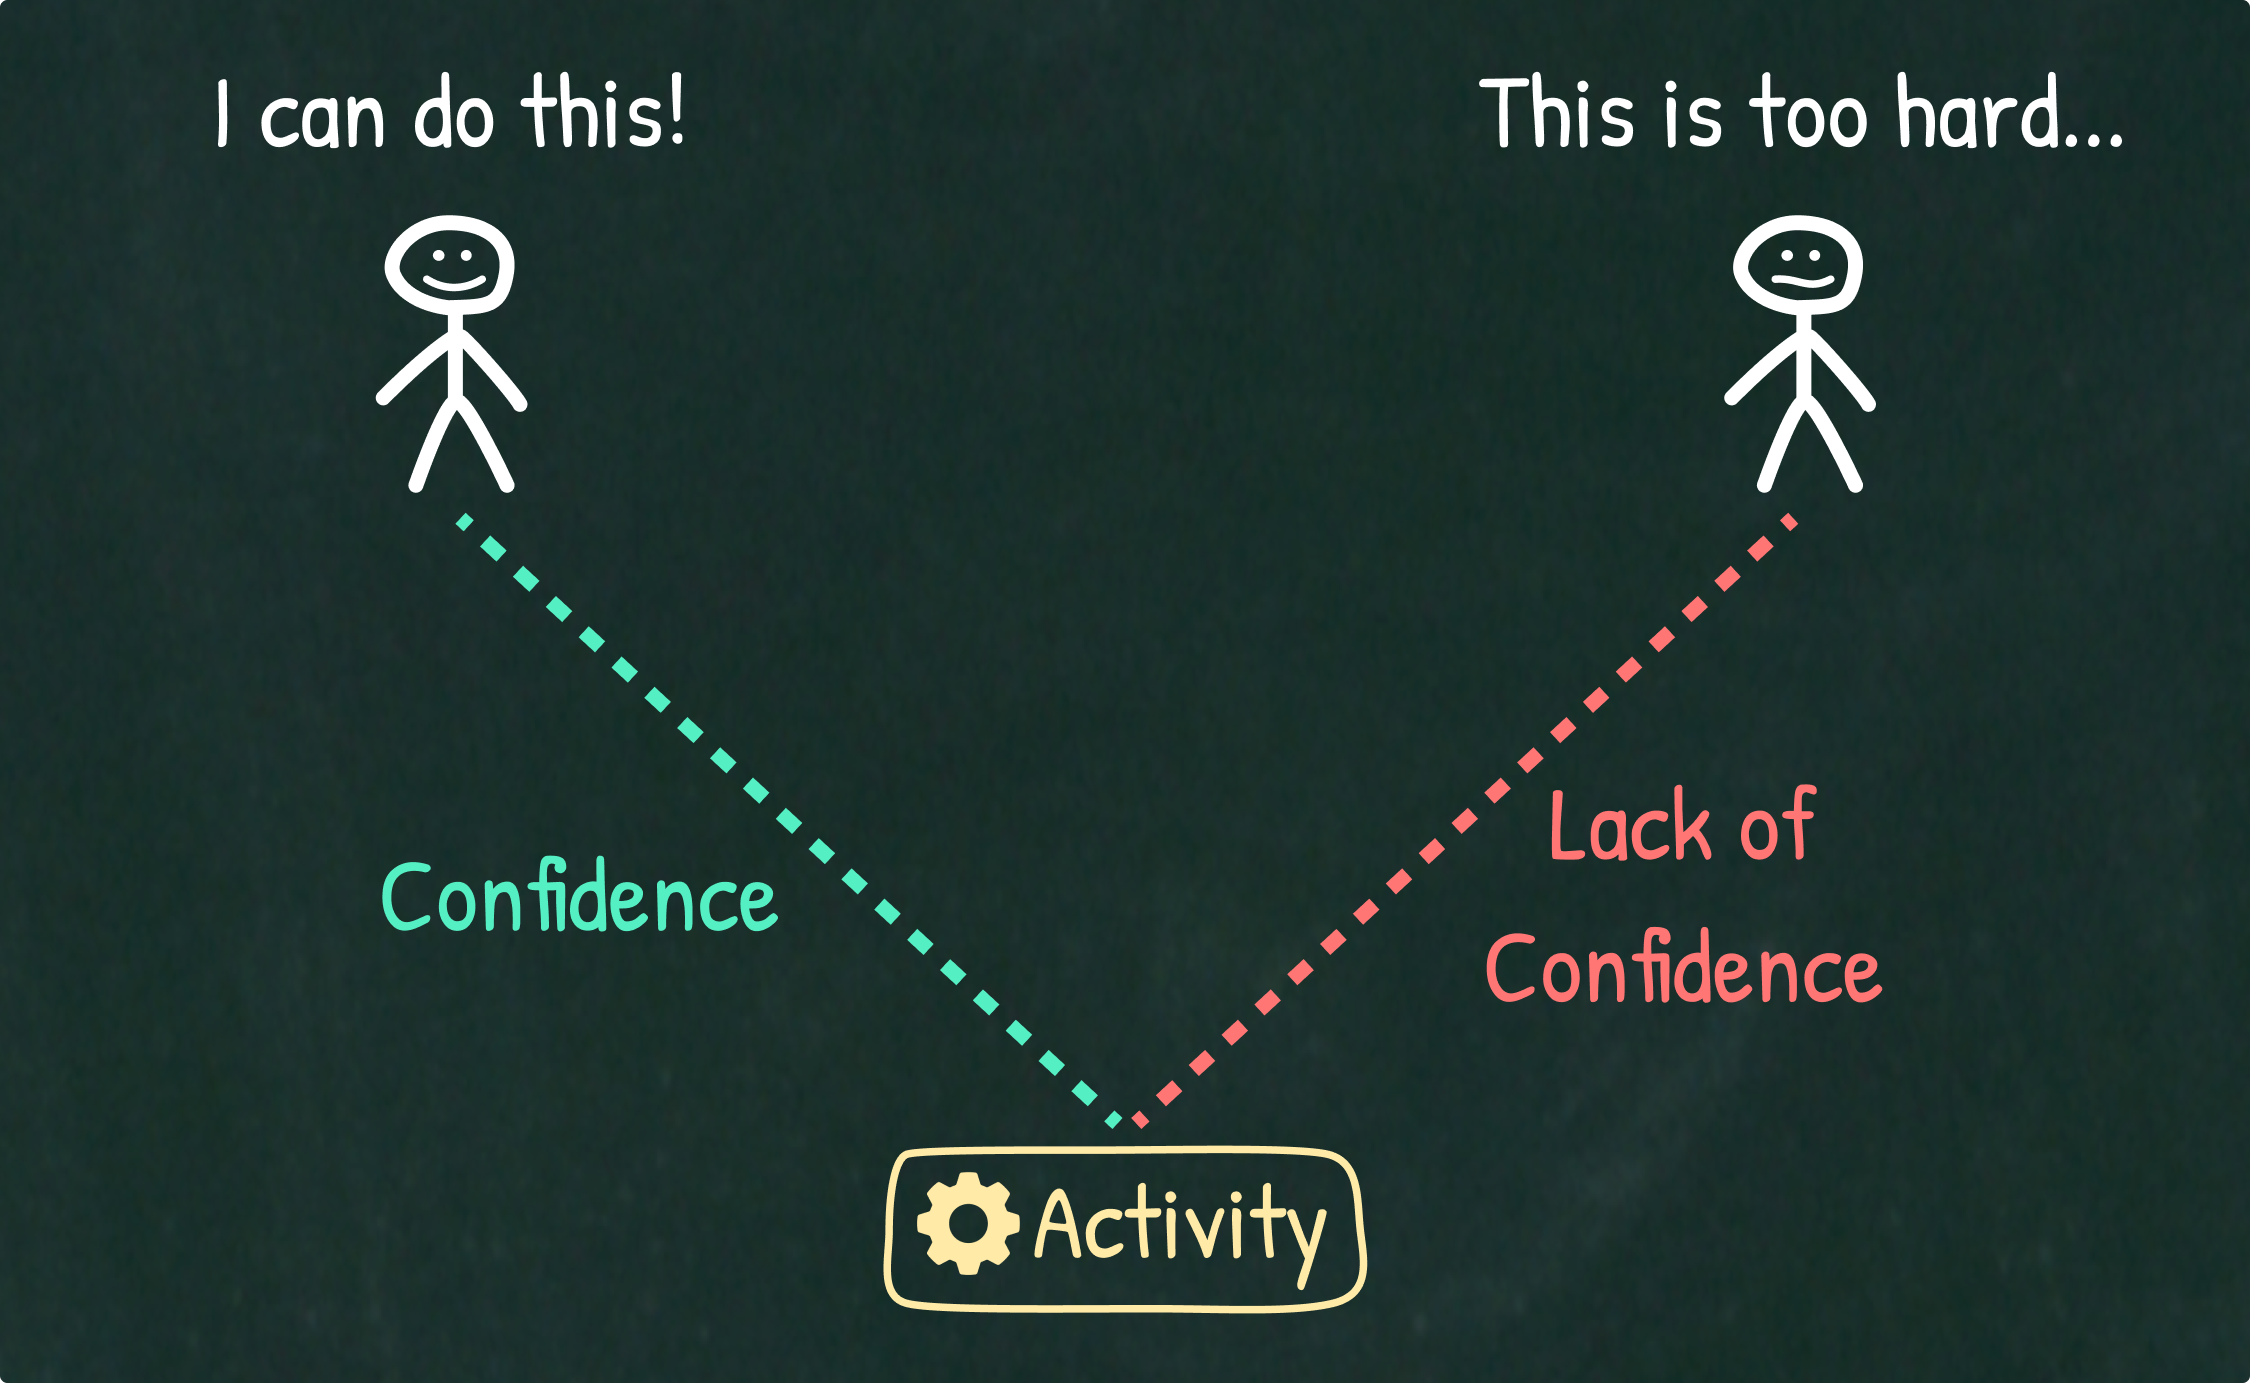 Comparison between one person who displays confidence, and another person who displays a lack of confidence.